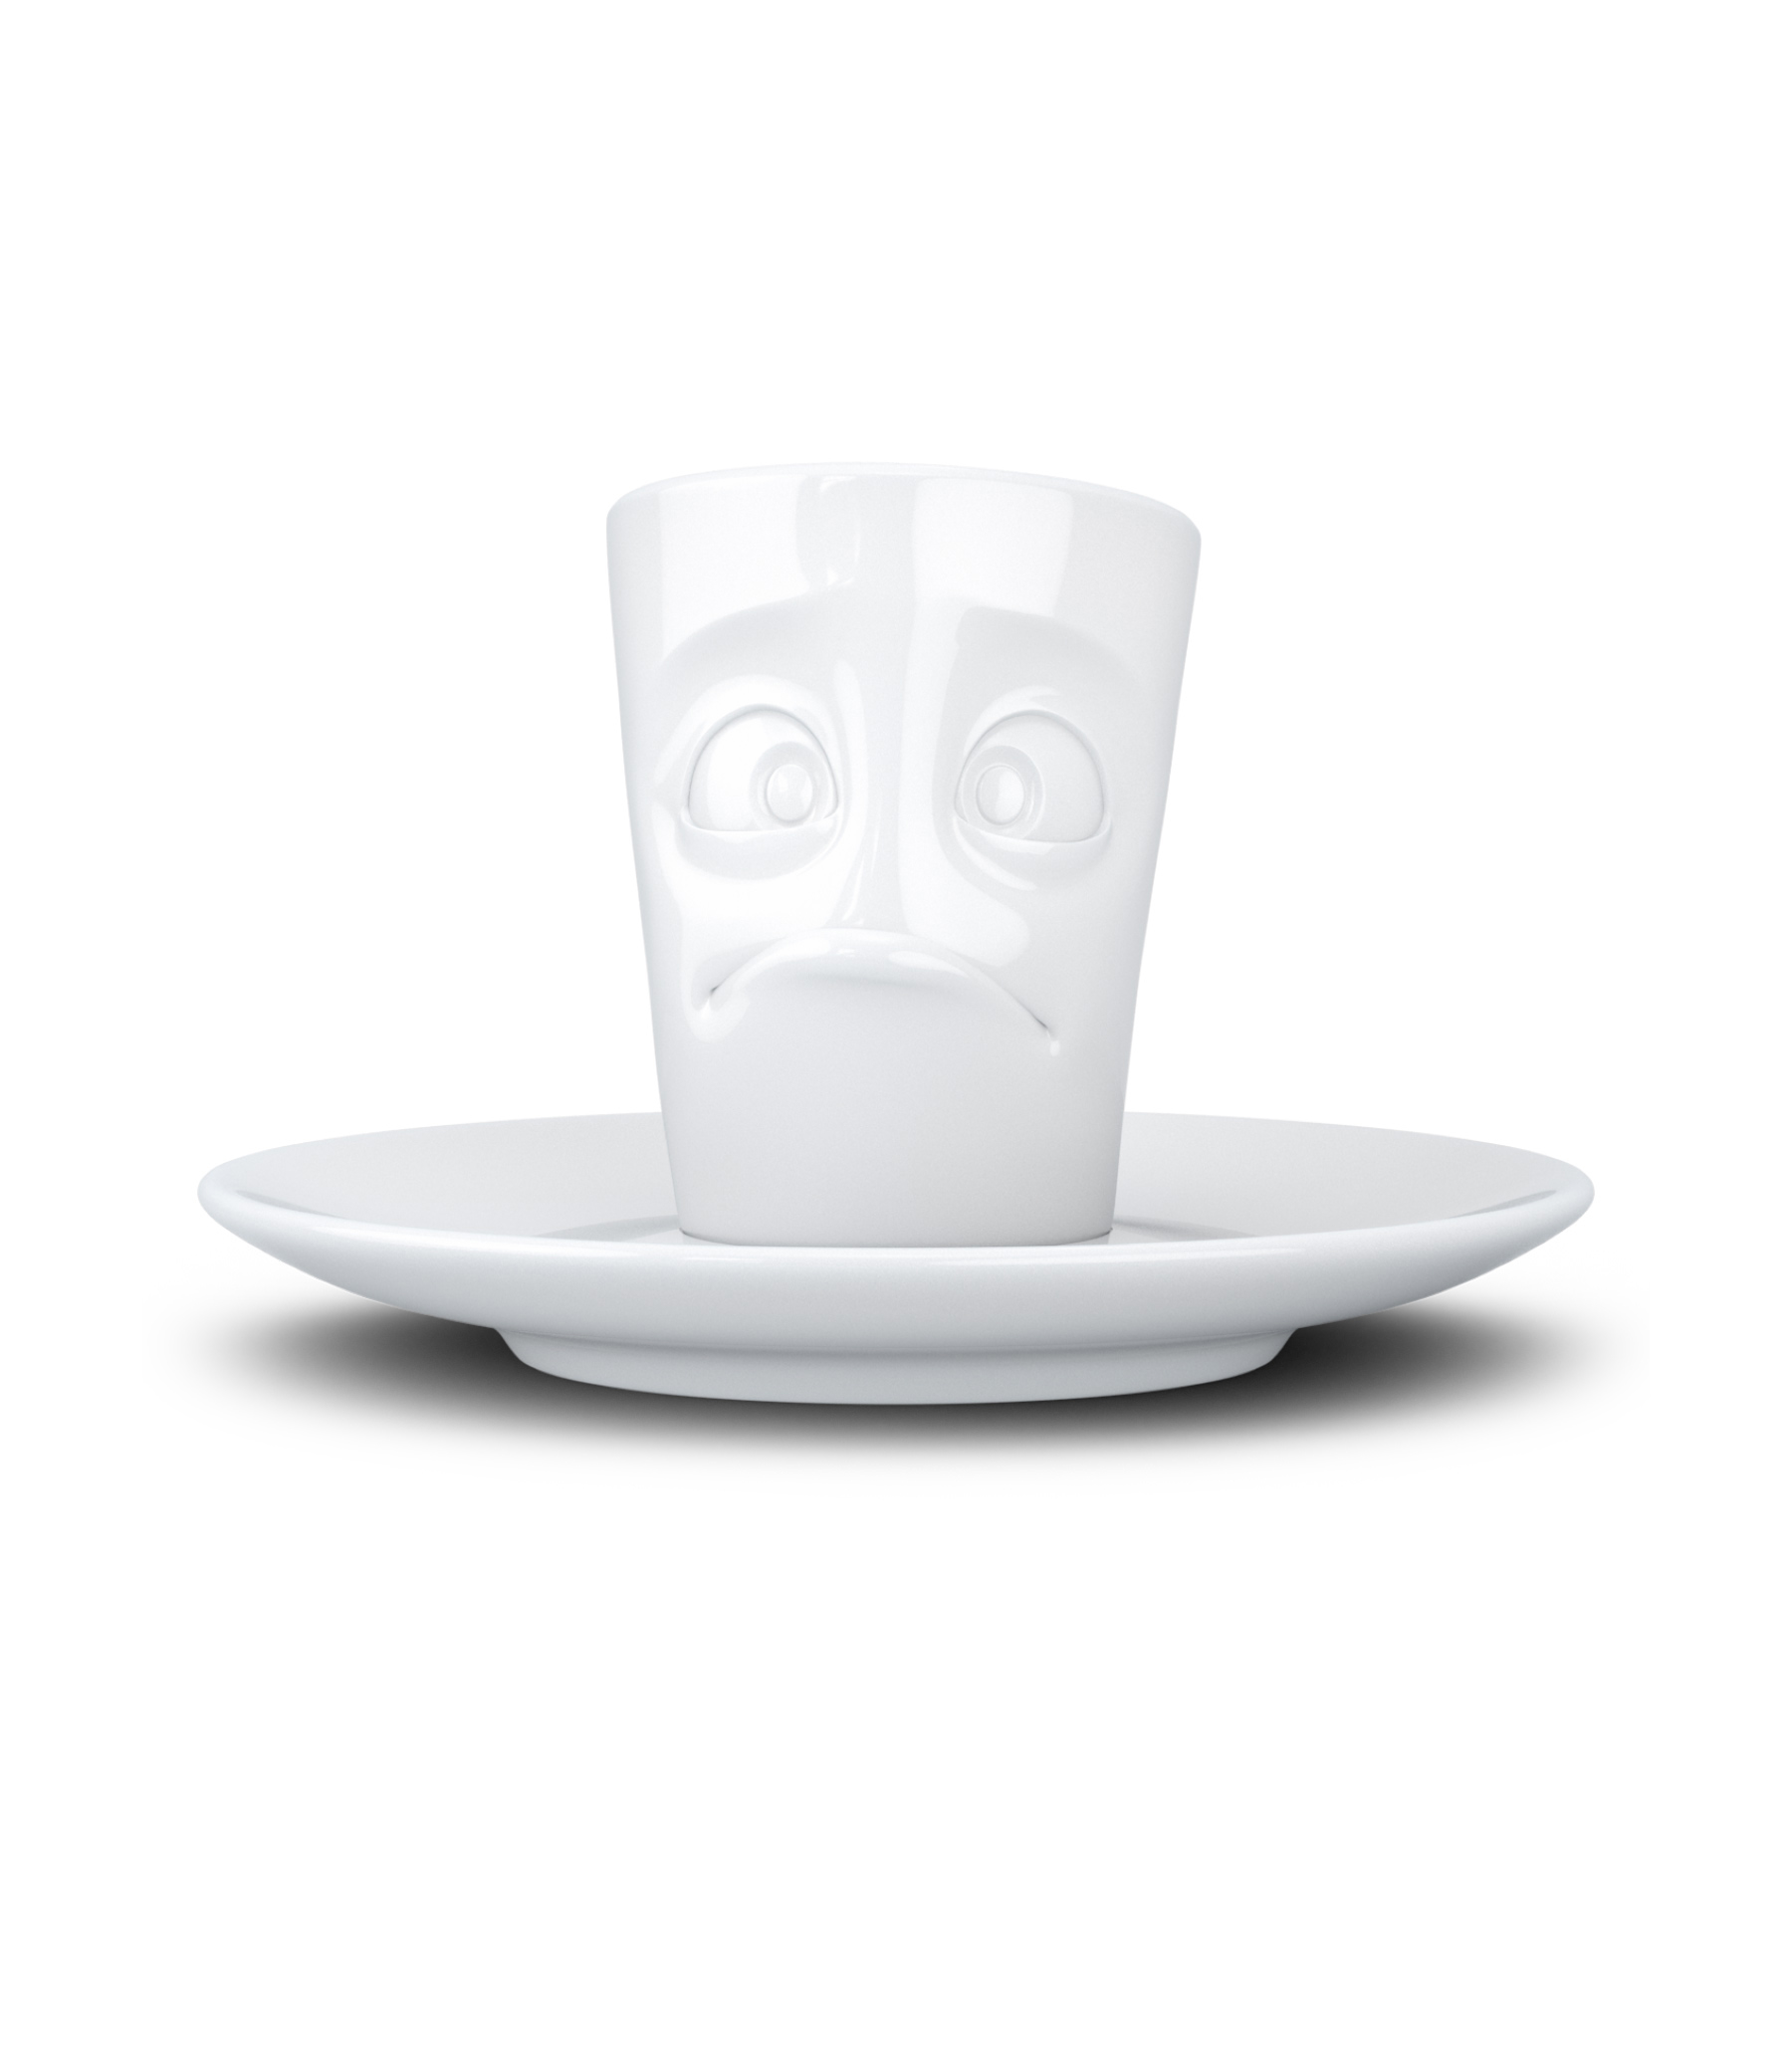 Mug expresso Perplexe avec soucoupe - Tassen by Fiftyeight Products